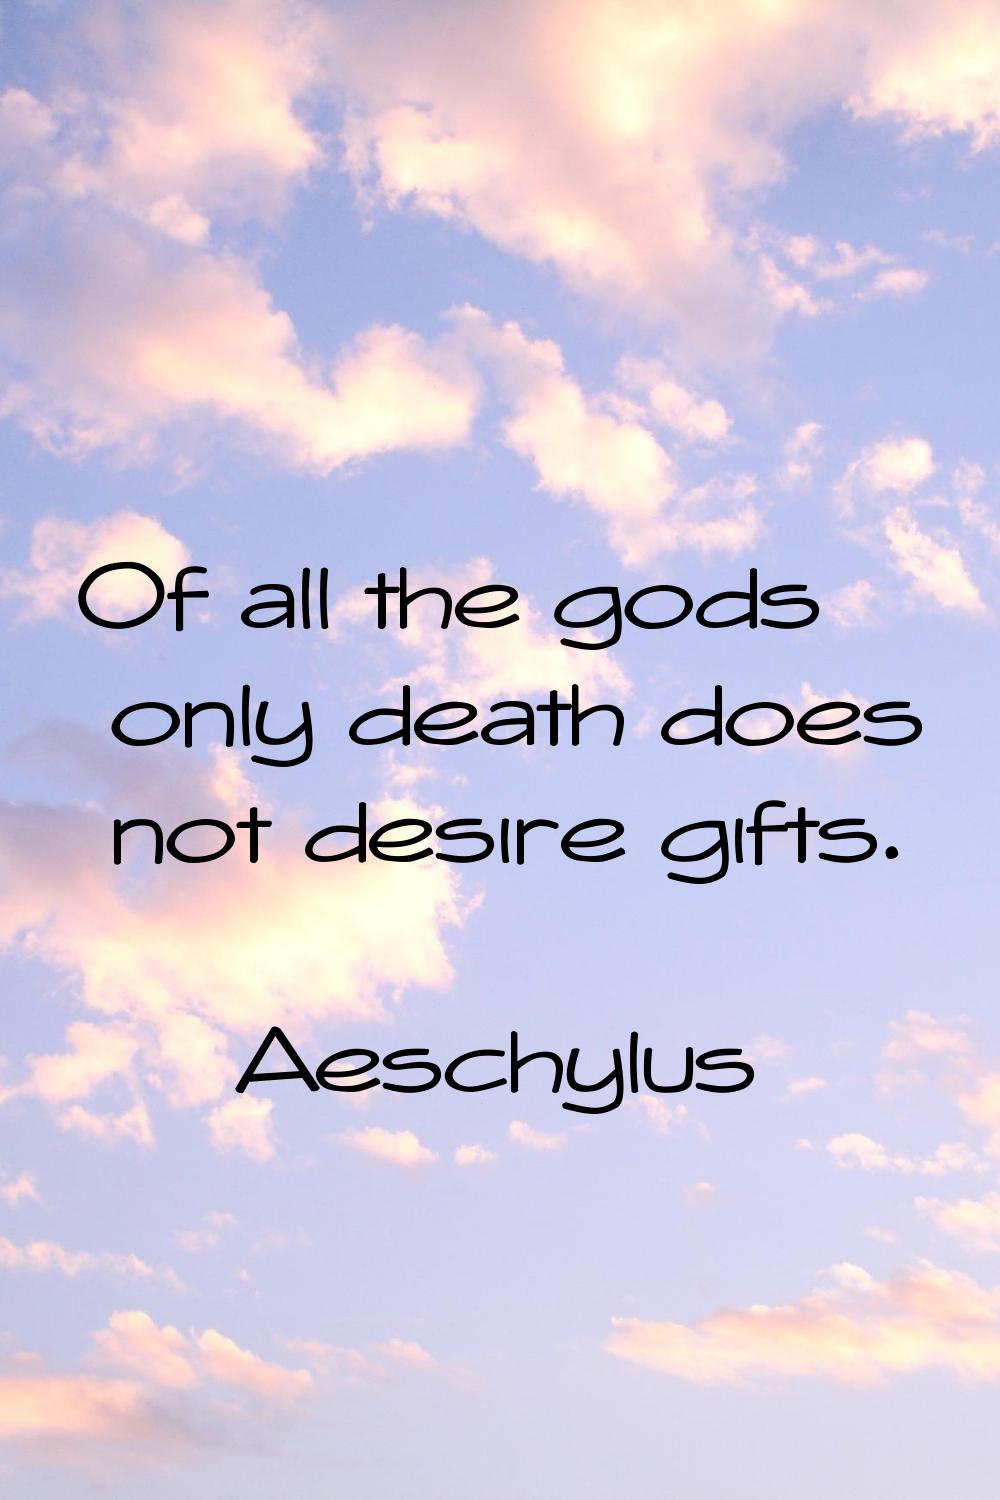 Of all the gods only death does not desire gifts.